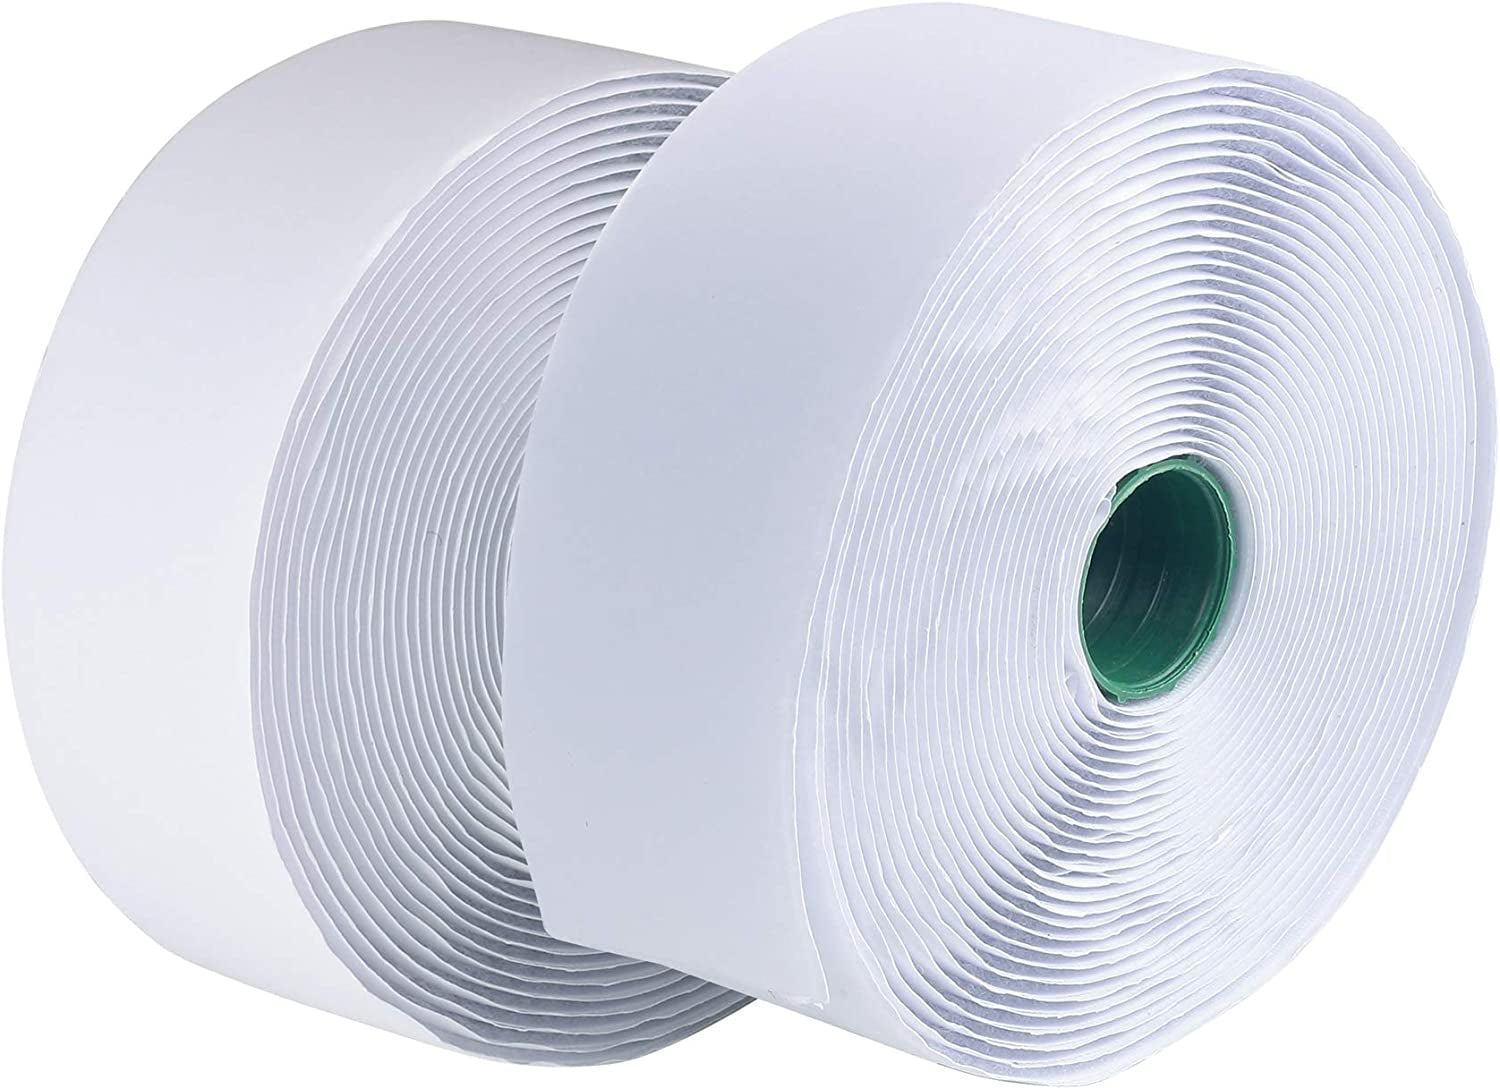 LLPT, LLPT Hook and Loop Tape 2 Inch X 23 Feet Heavy Duty Adhesive Industrial Strength Hook Loop Strip Mounting Tape for Indoor and Outdoor White (HTW230)